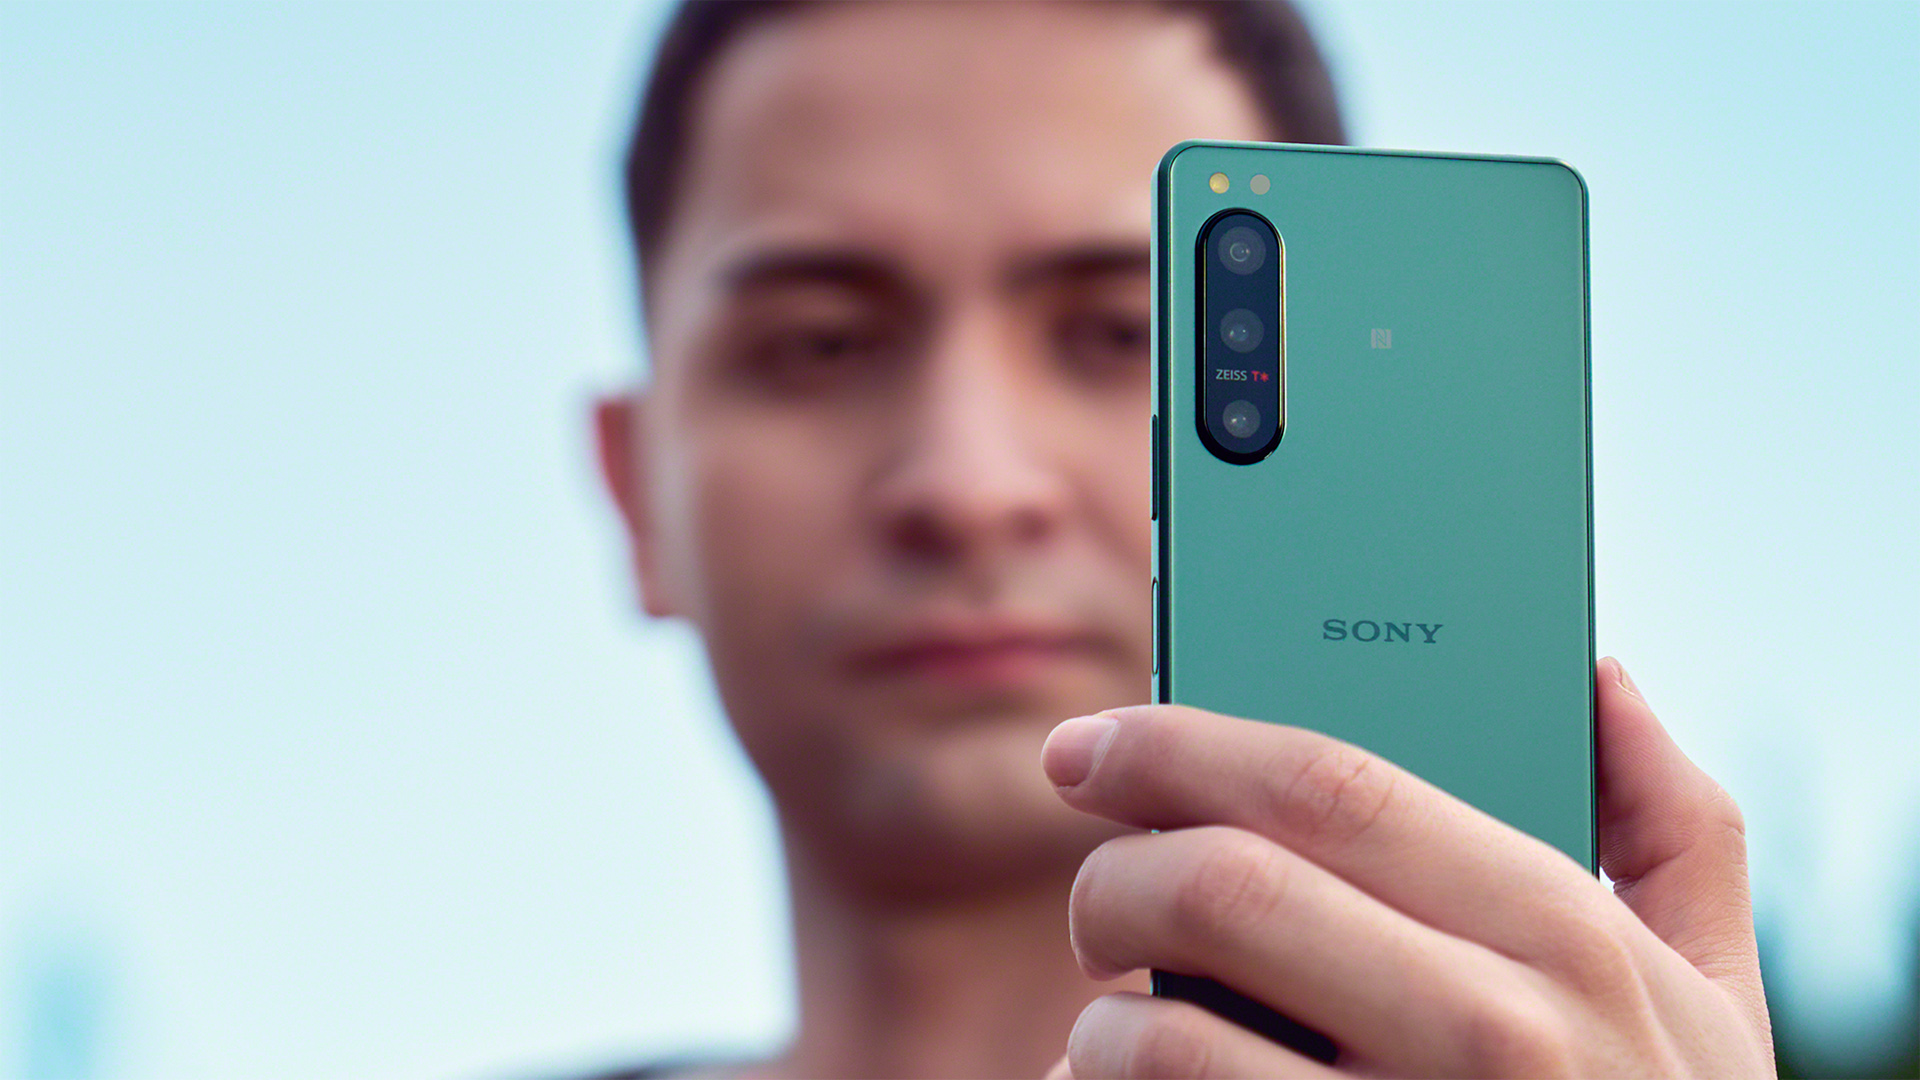 Buitengewoon Inspireren aan de andere kant, Sony Xperia 5 IV Introduced – 4K/120p On All Main Cameras, External  Monitoring With Alpha Series | CineD